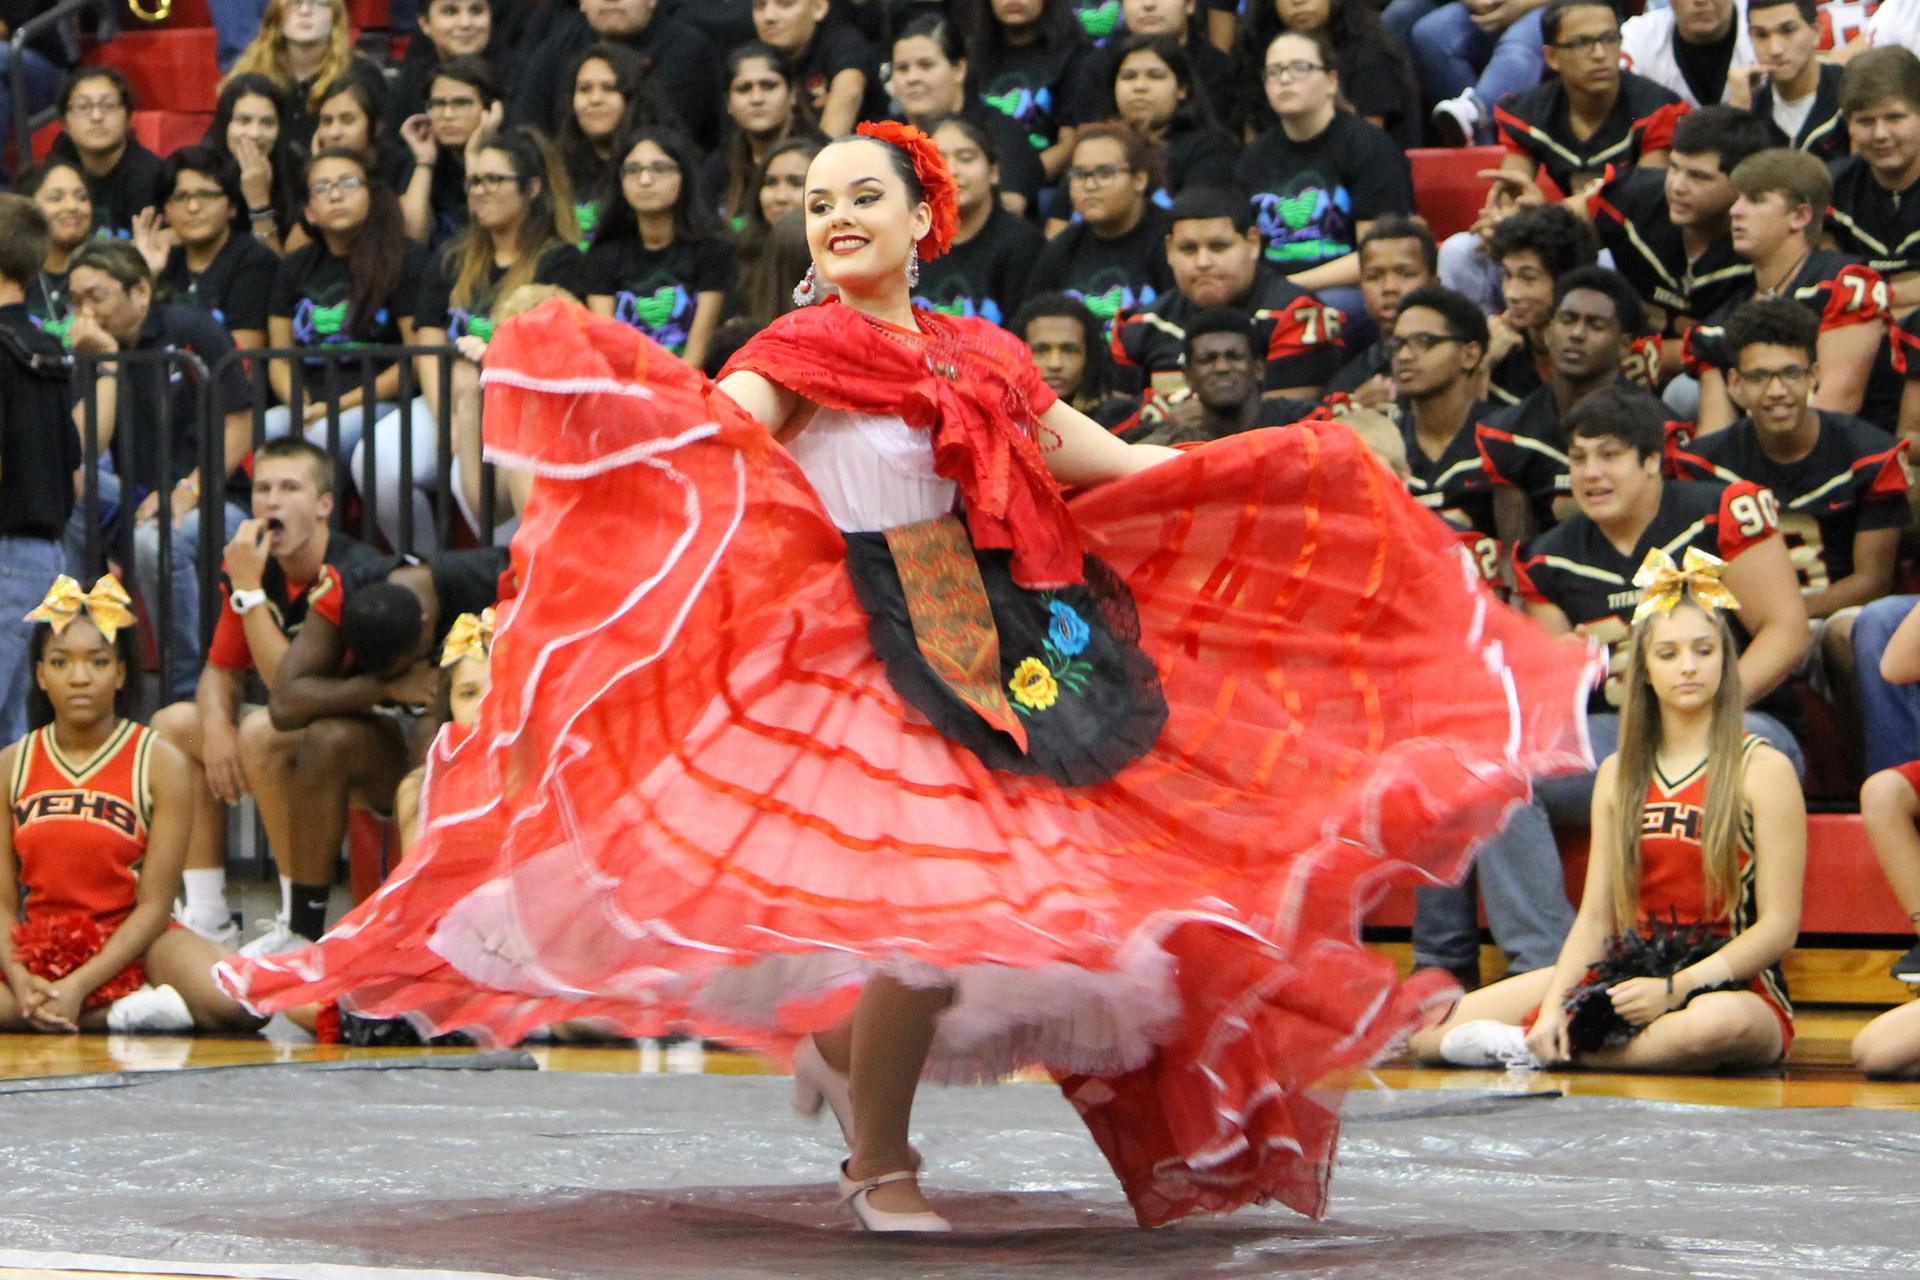 Ballet Folklorico:  Performer in a red dress dancing.